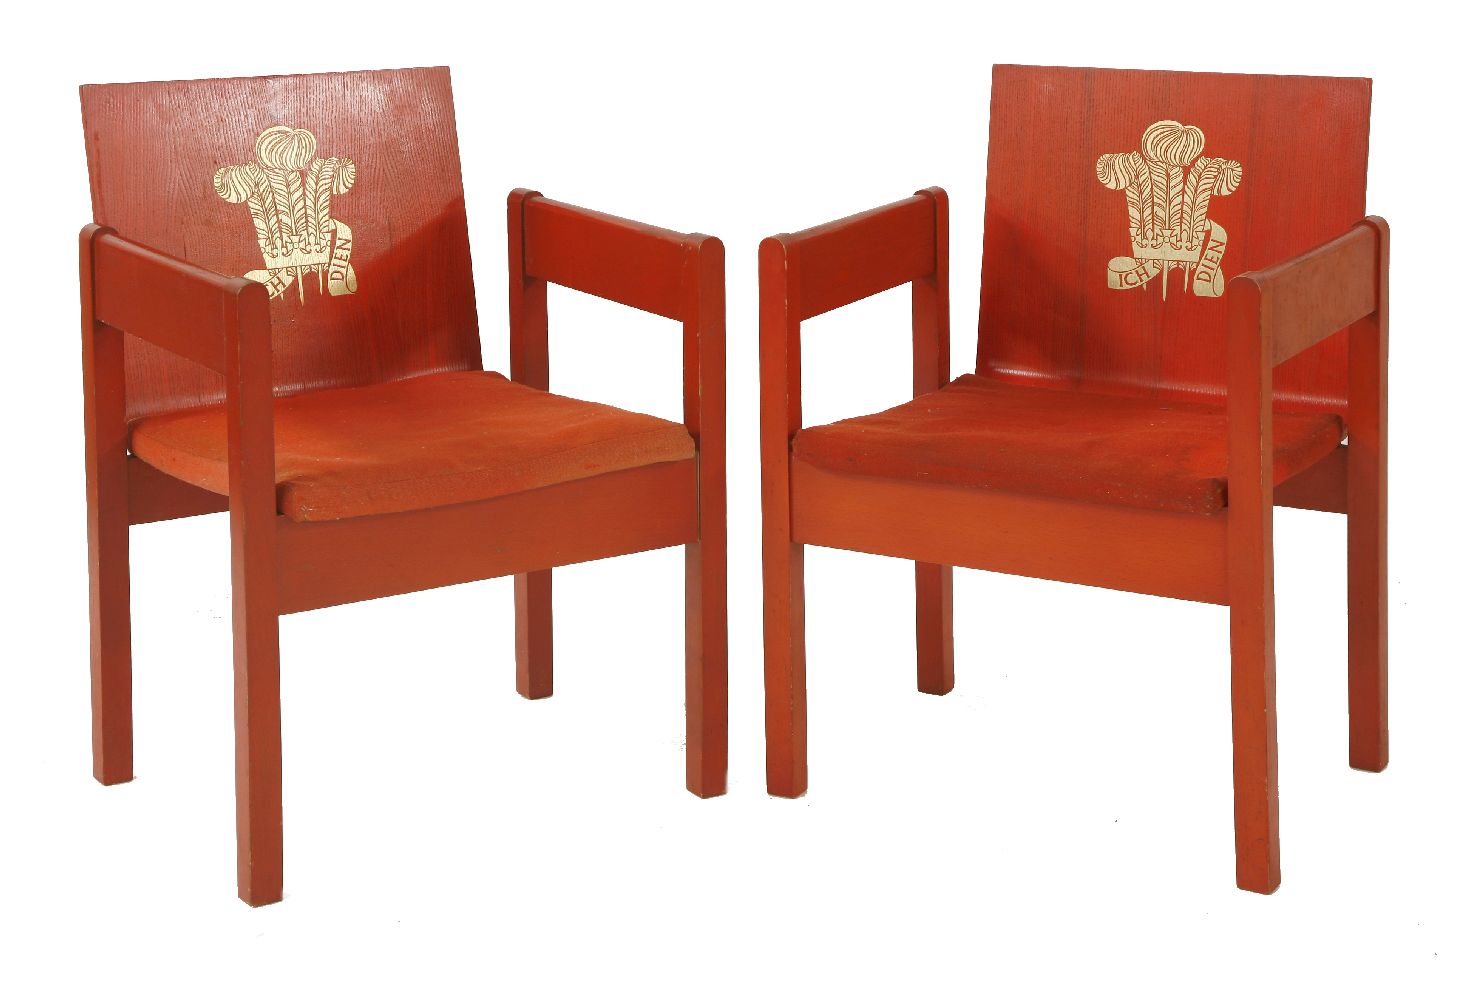 A pair of Prince of Wales Investiture armchairs,1969, designed by Anthony Armstrong-Jones, Carl Toms